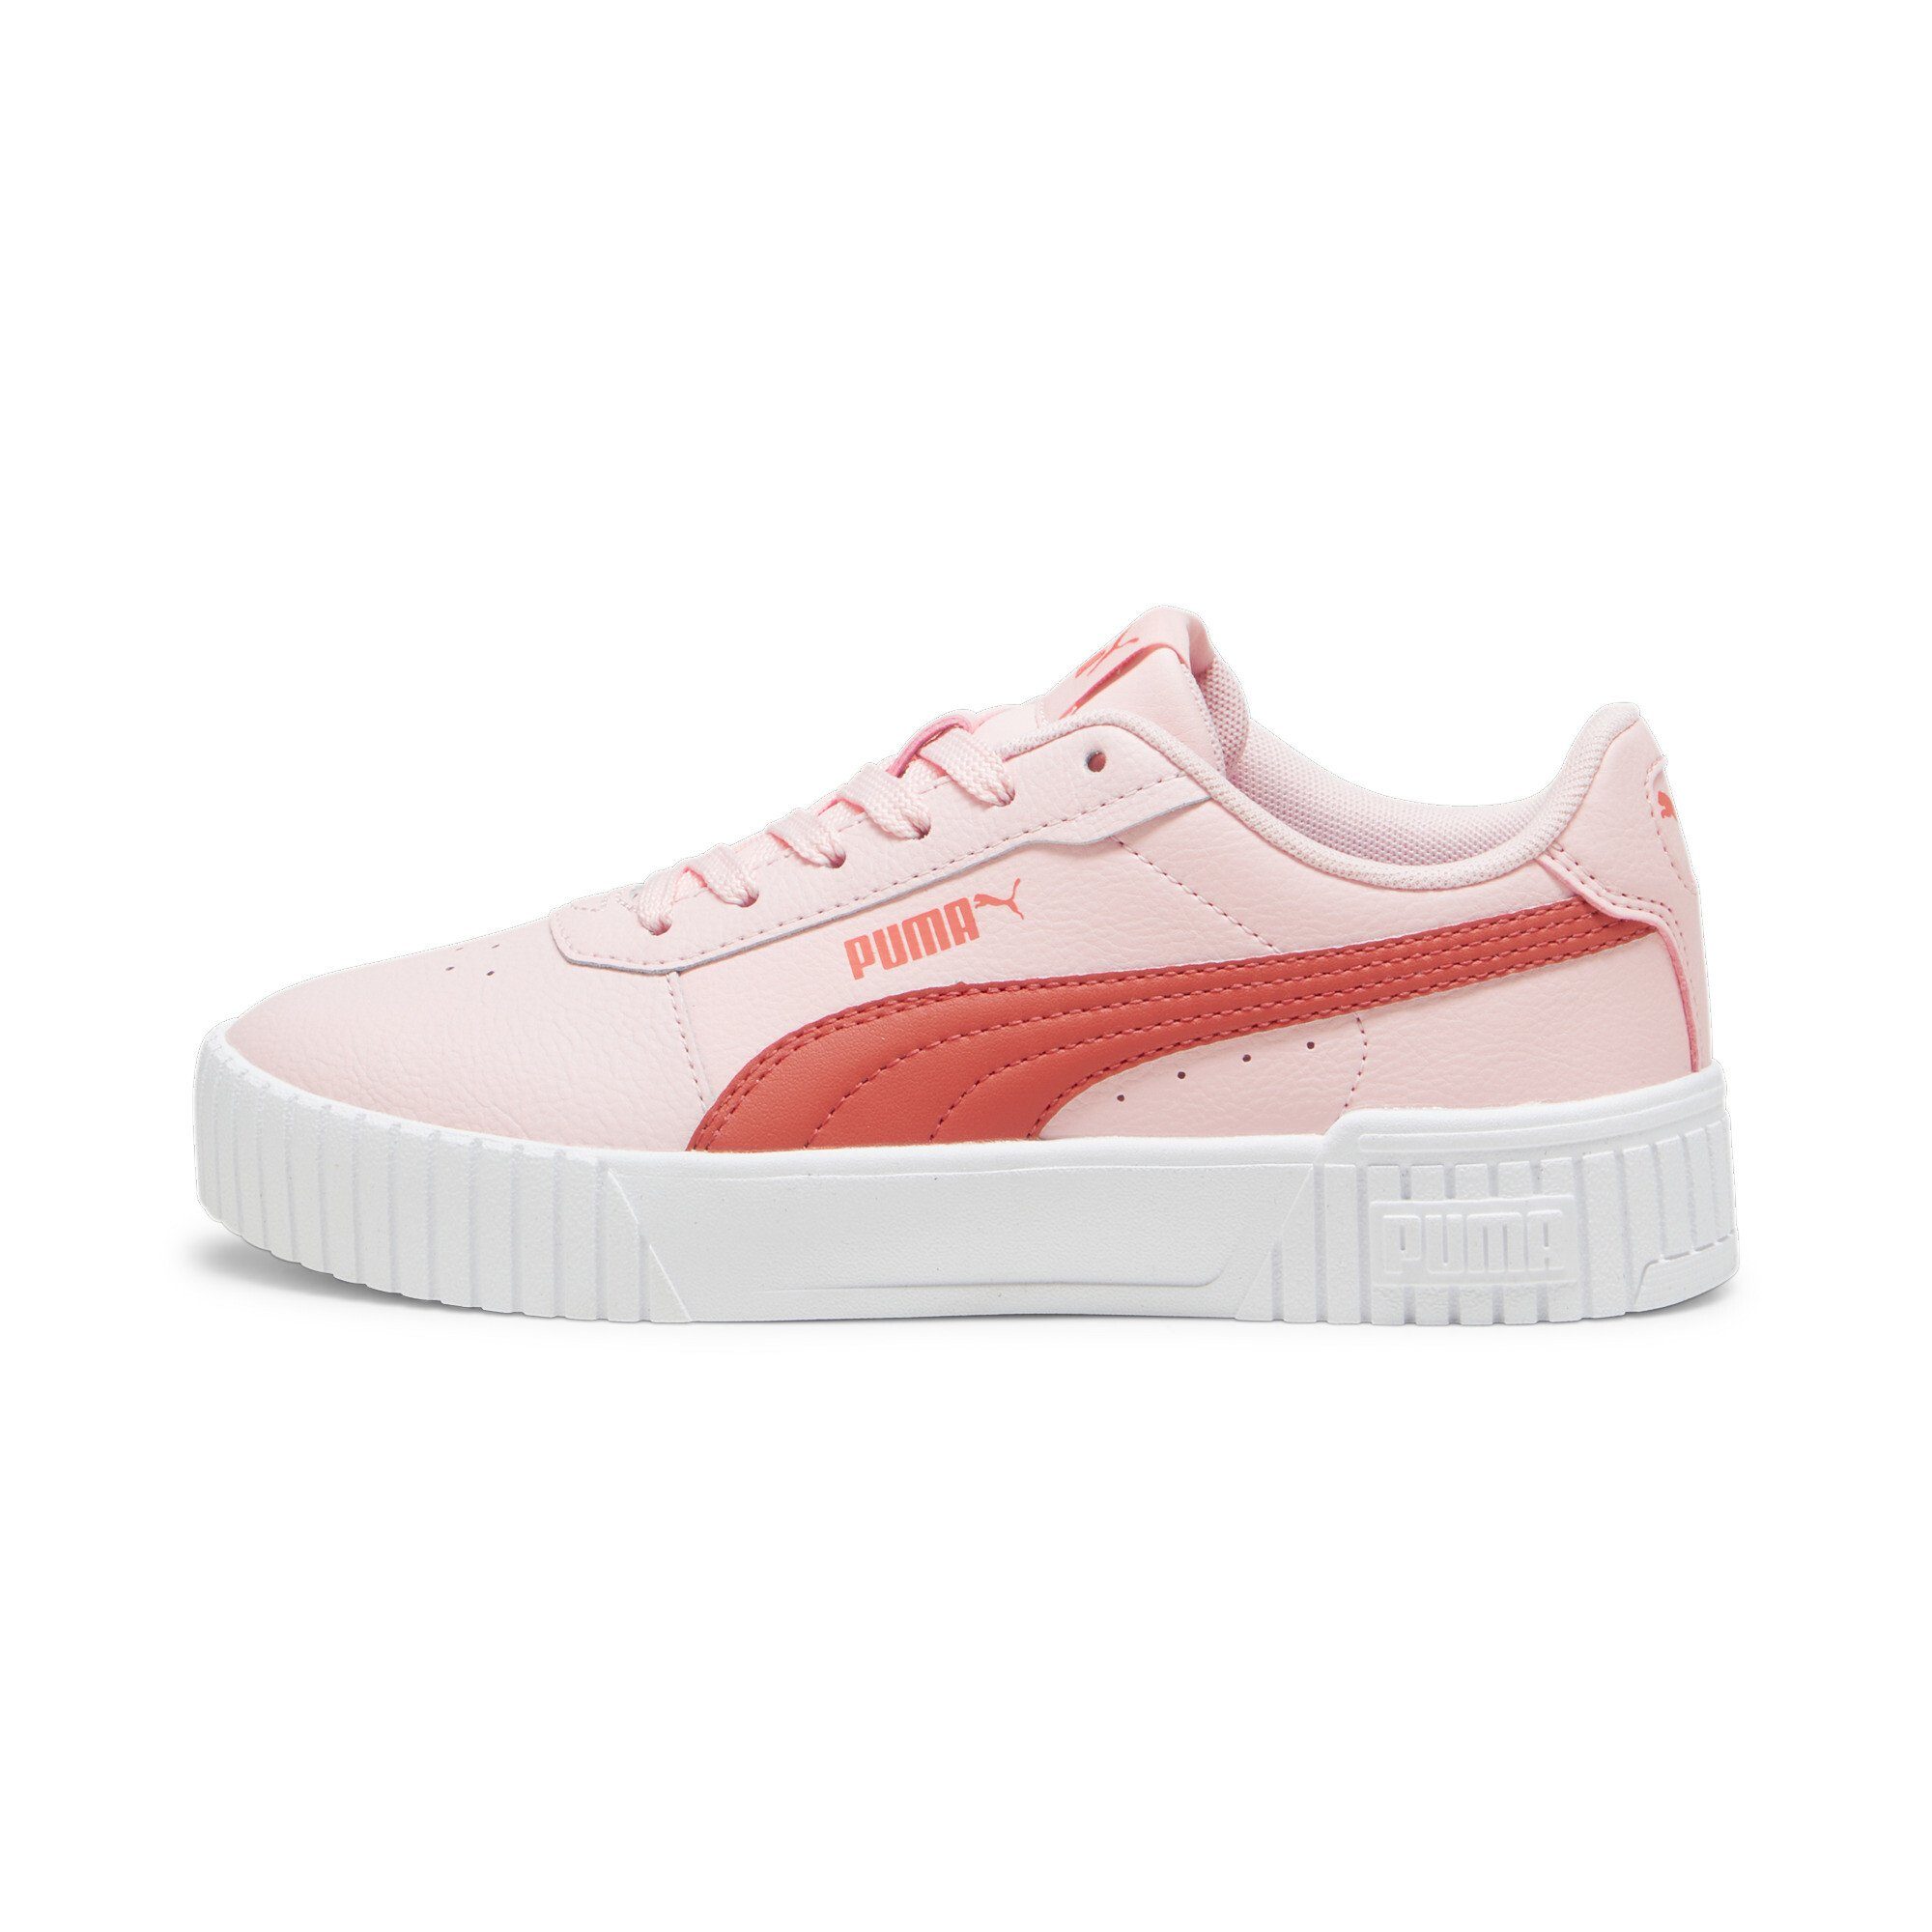 Carina Jugendliche 2.0 Red Sneaker Whisp Active Of White Pink Sneakers PUMA